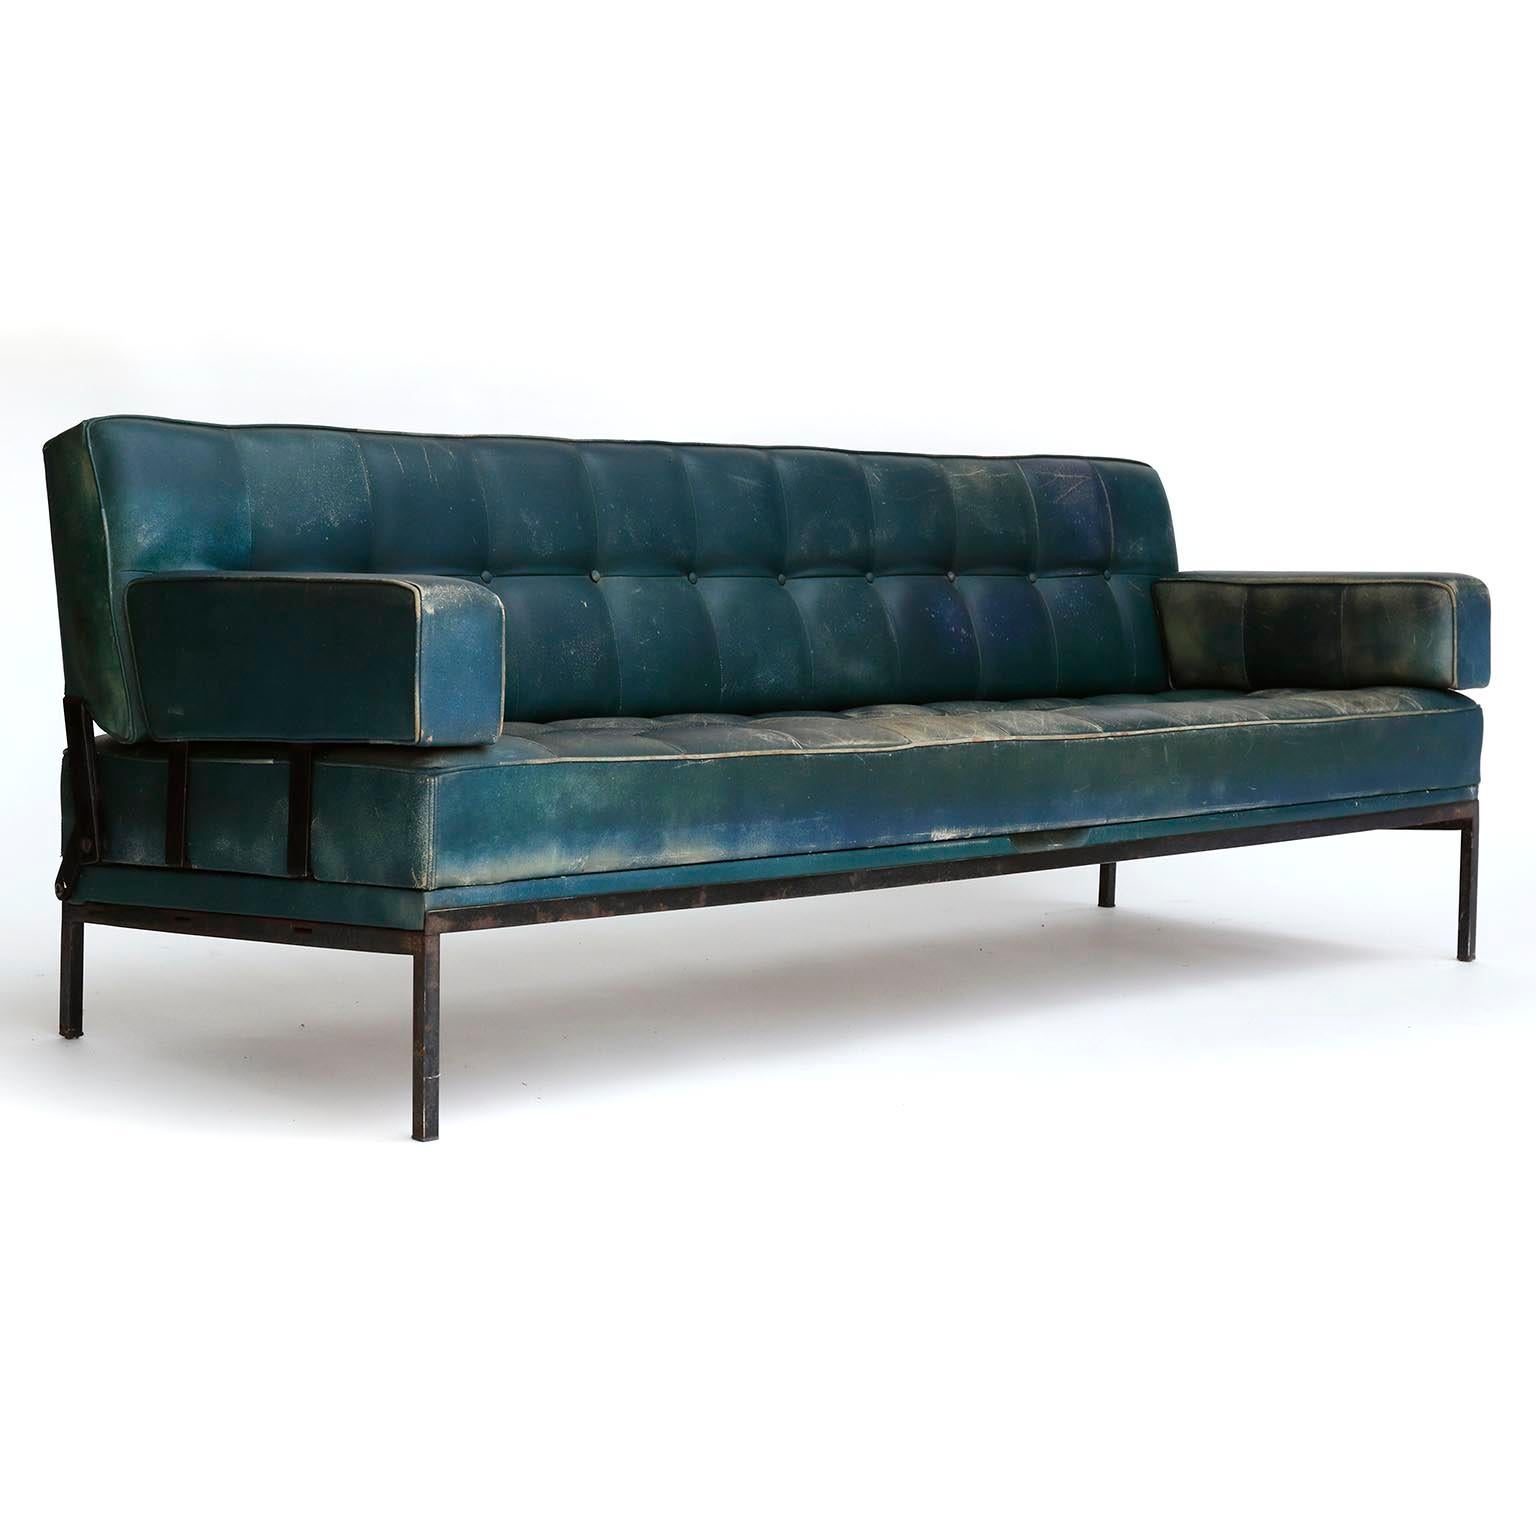 Austrian Johannes Spalt 'Constanze' Sofa Daybed Armrests, Patinated Green Leather, 1960s